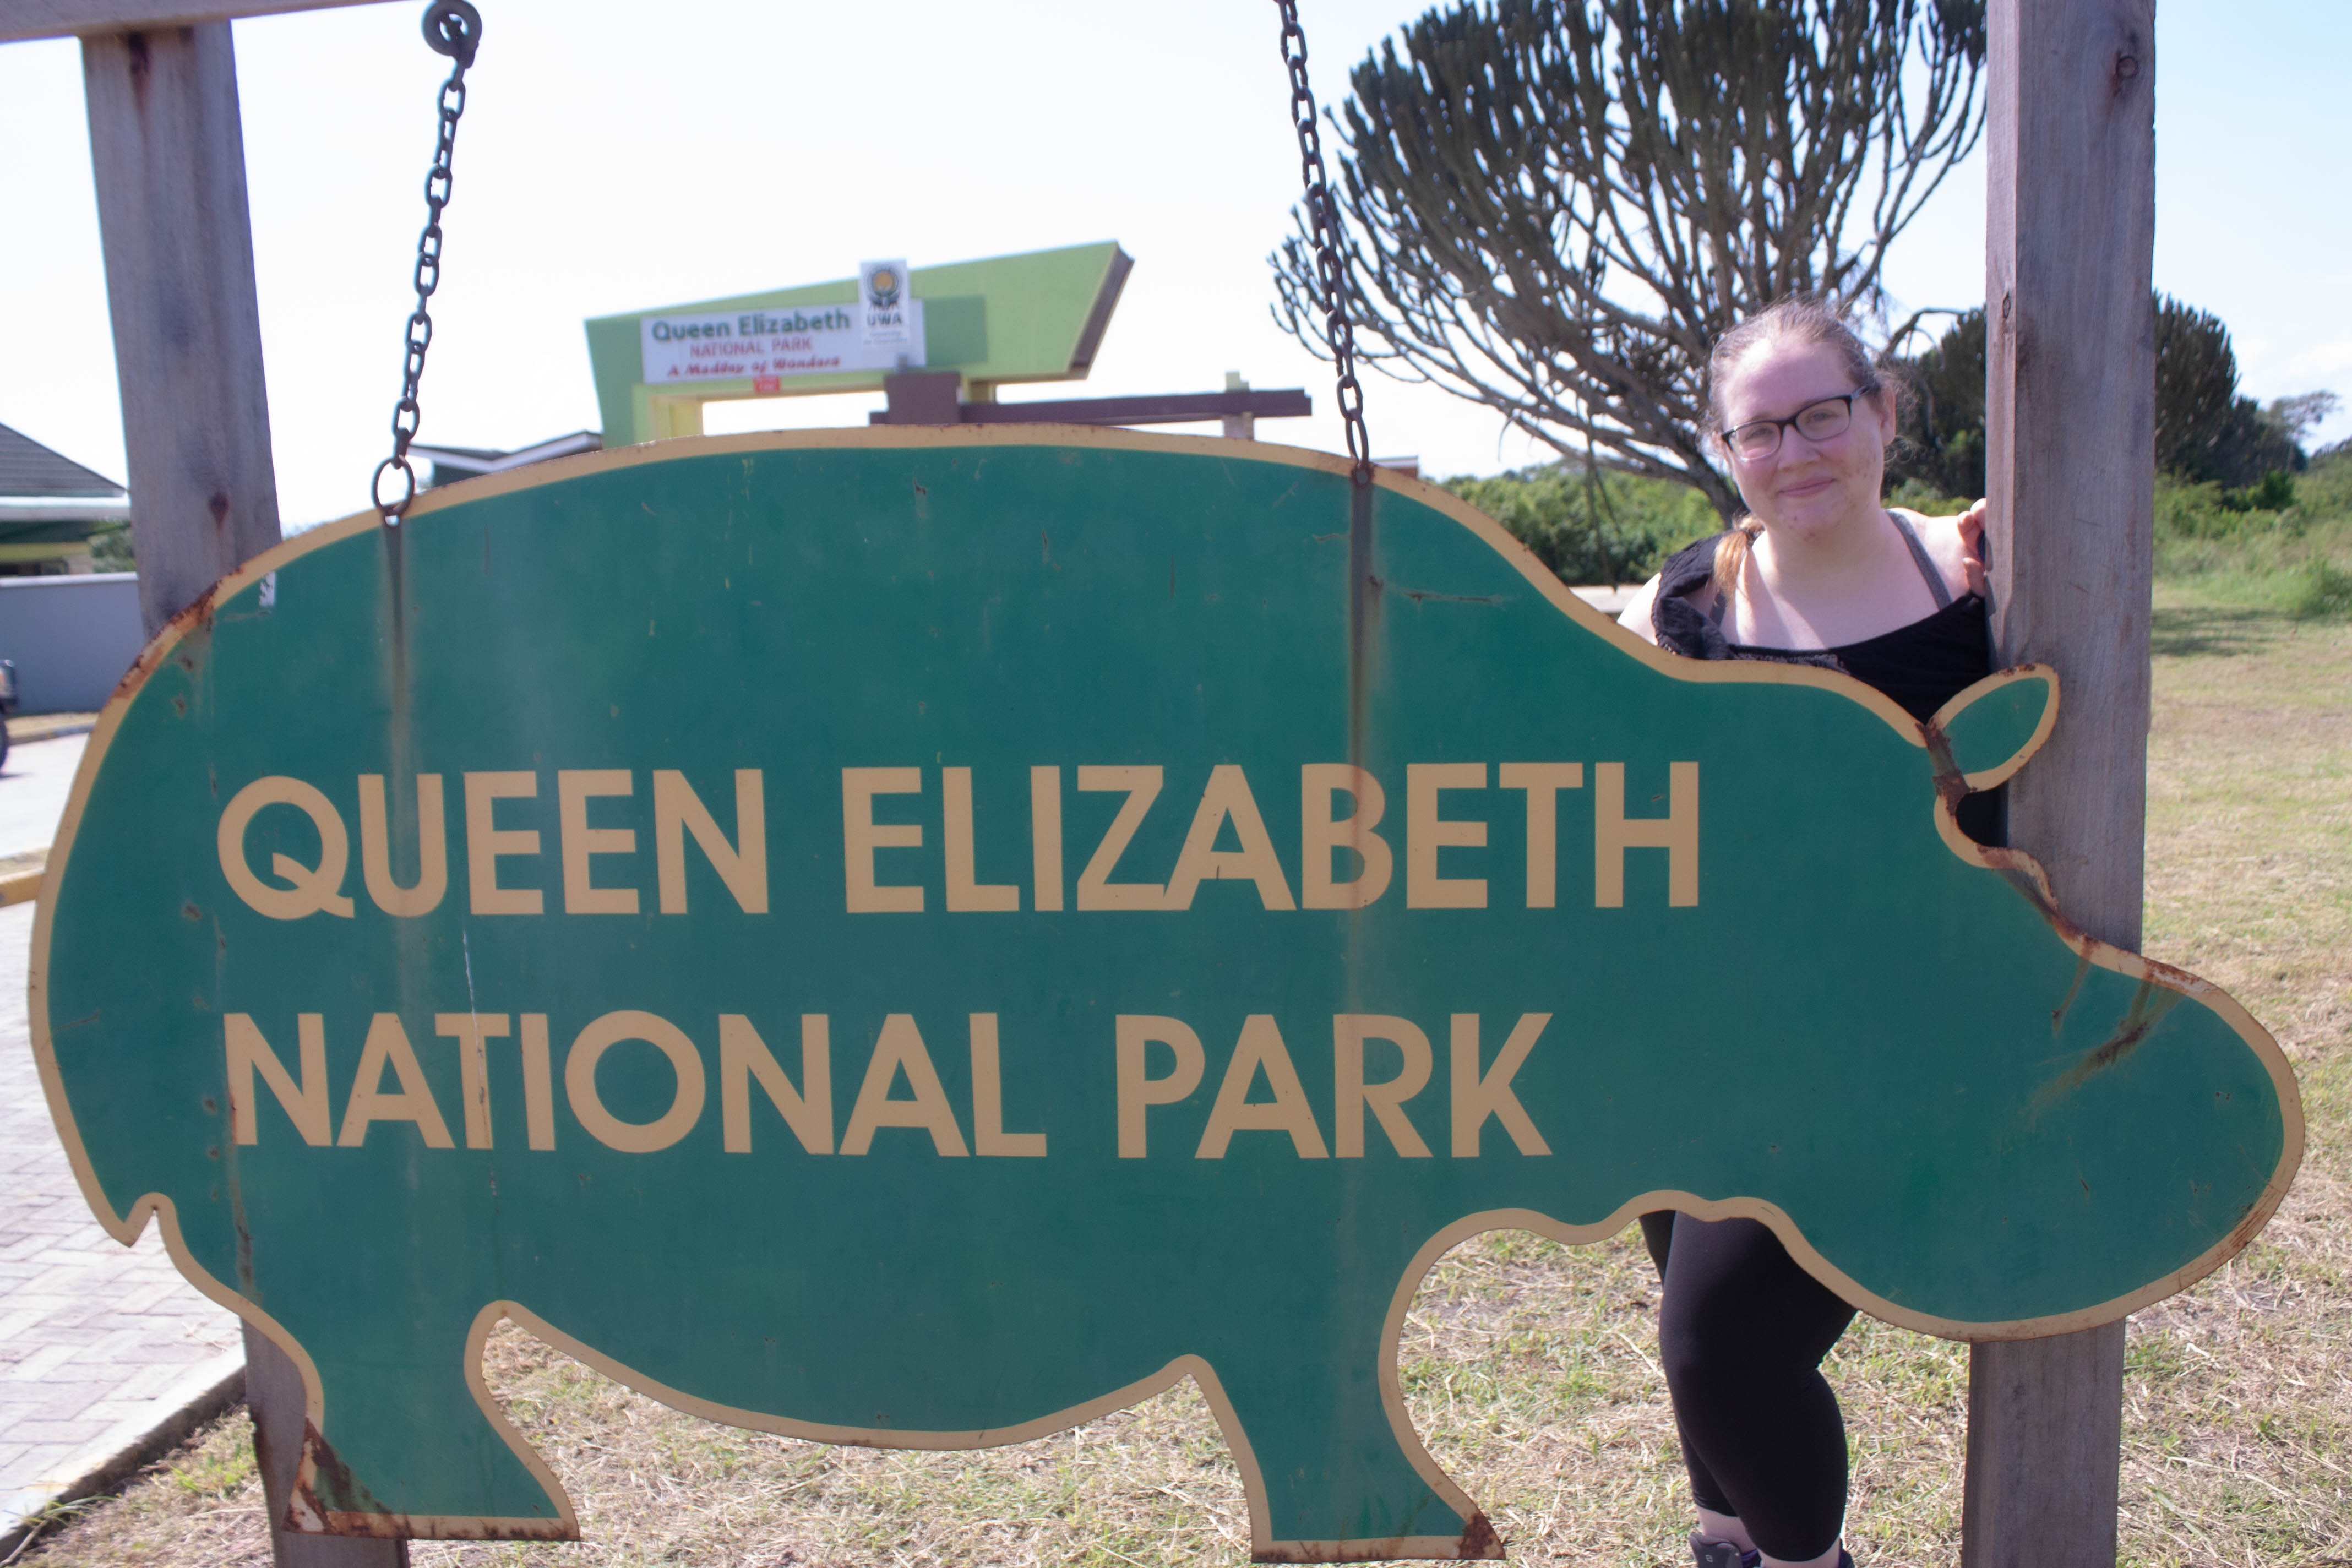 Jambo's customer success lead, Kristen on day 2 of the Jambo and Classrooms for Africa trip to Uganda. Day 2 the team visited the Queen Elizabeth National Park